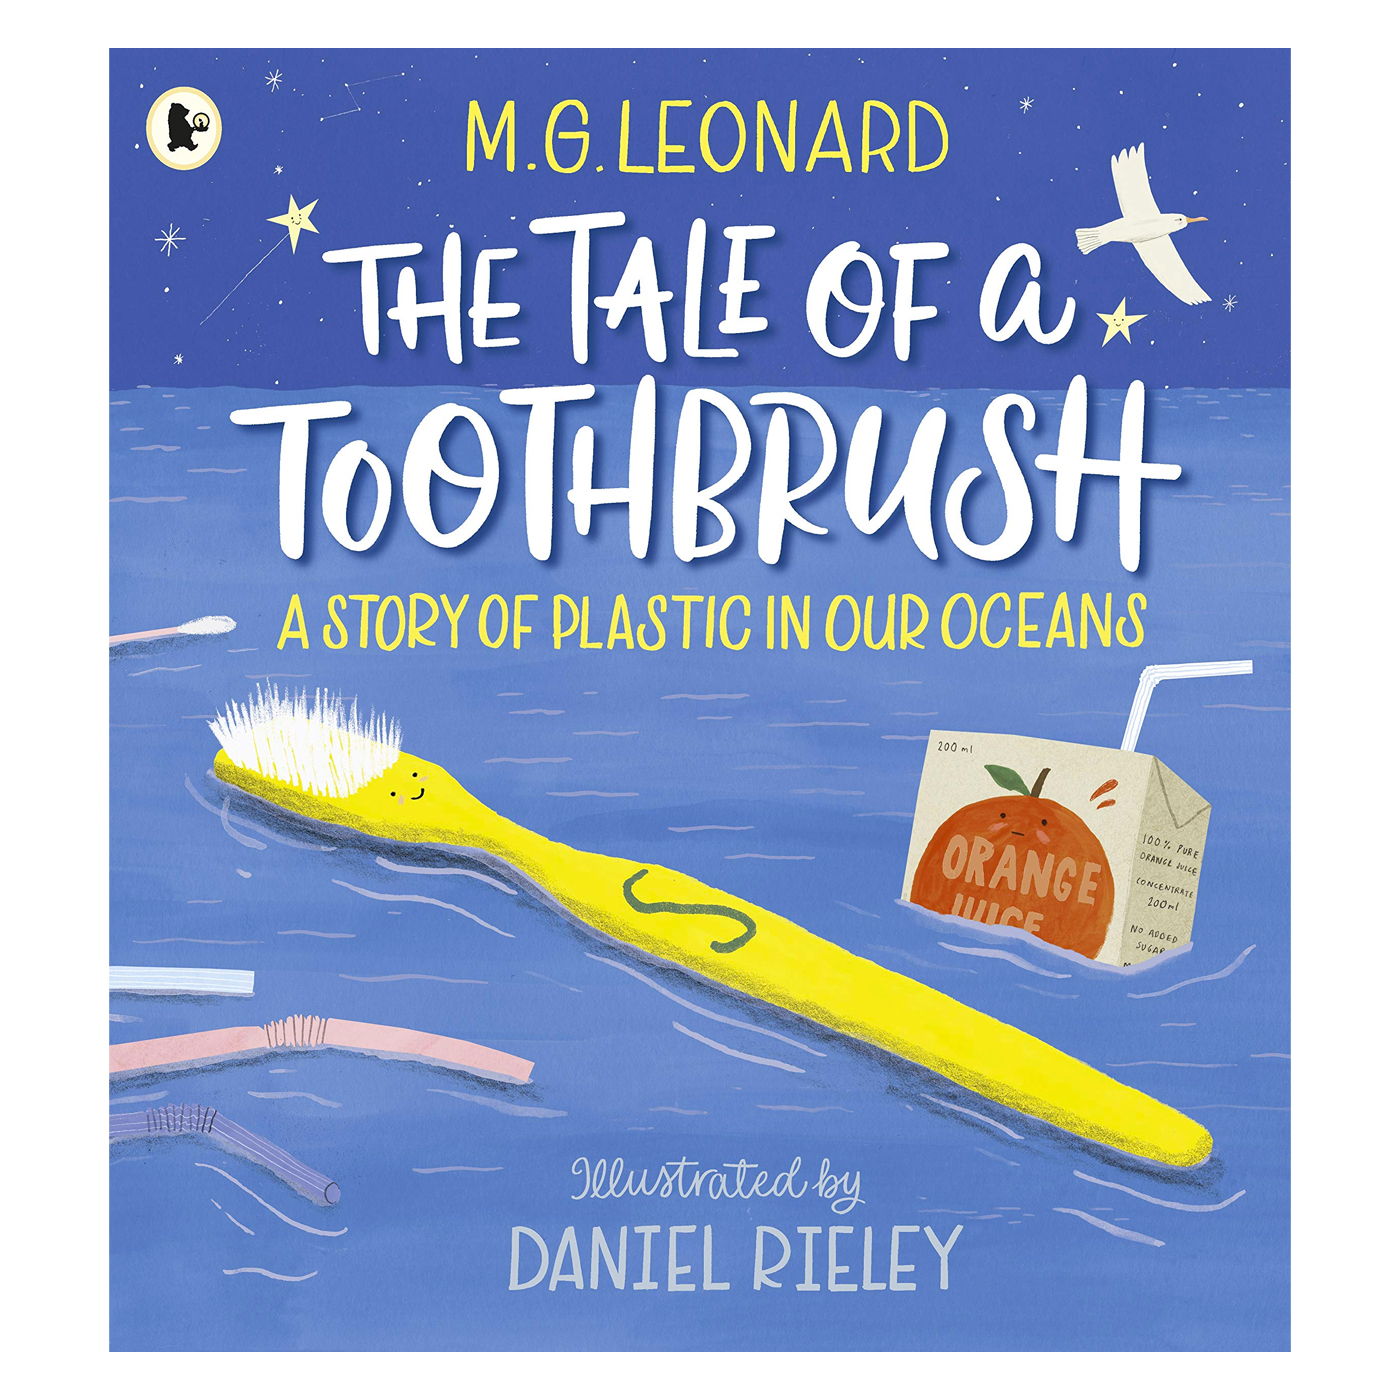 WALKER BOOKS The Tale Of A Toothbrush